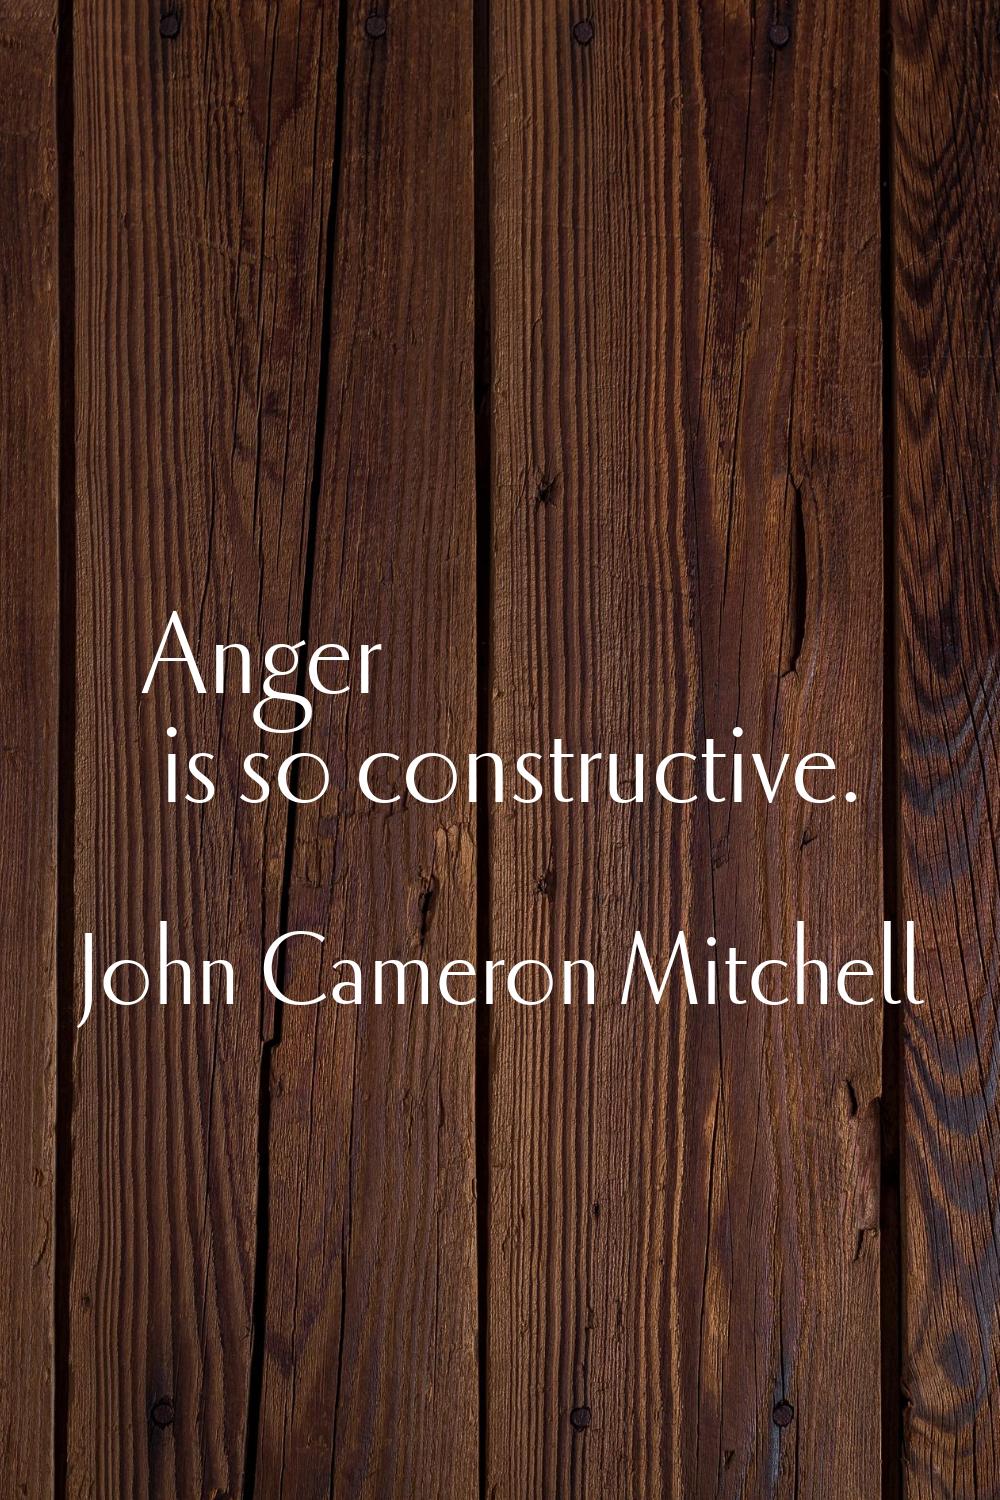 Anger is so constructive.